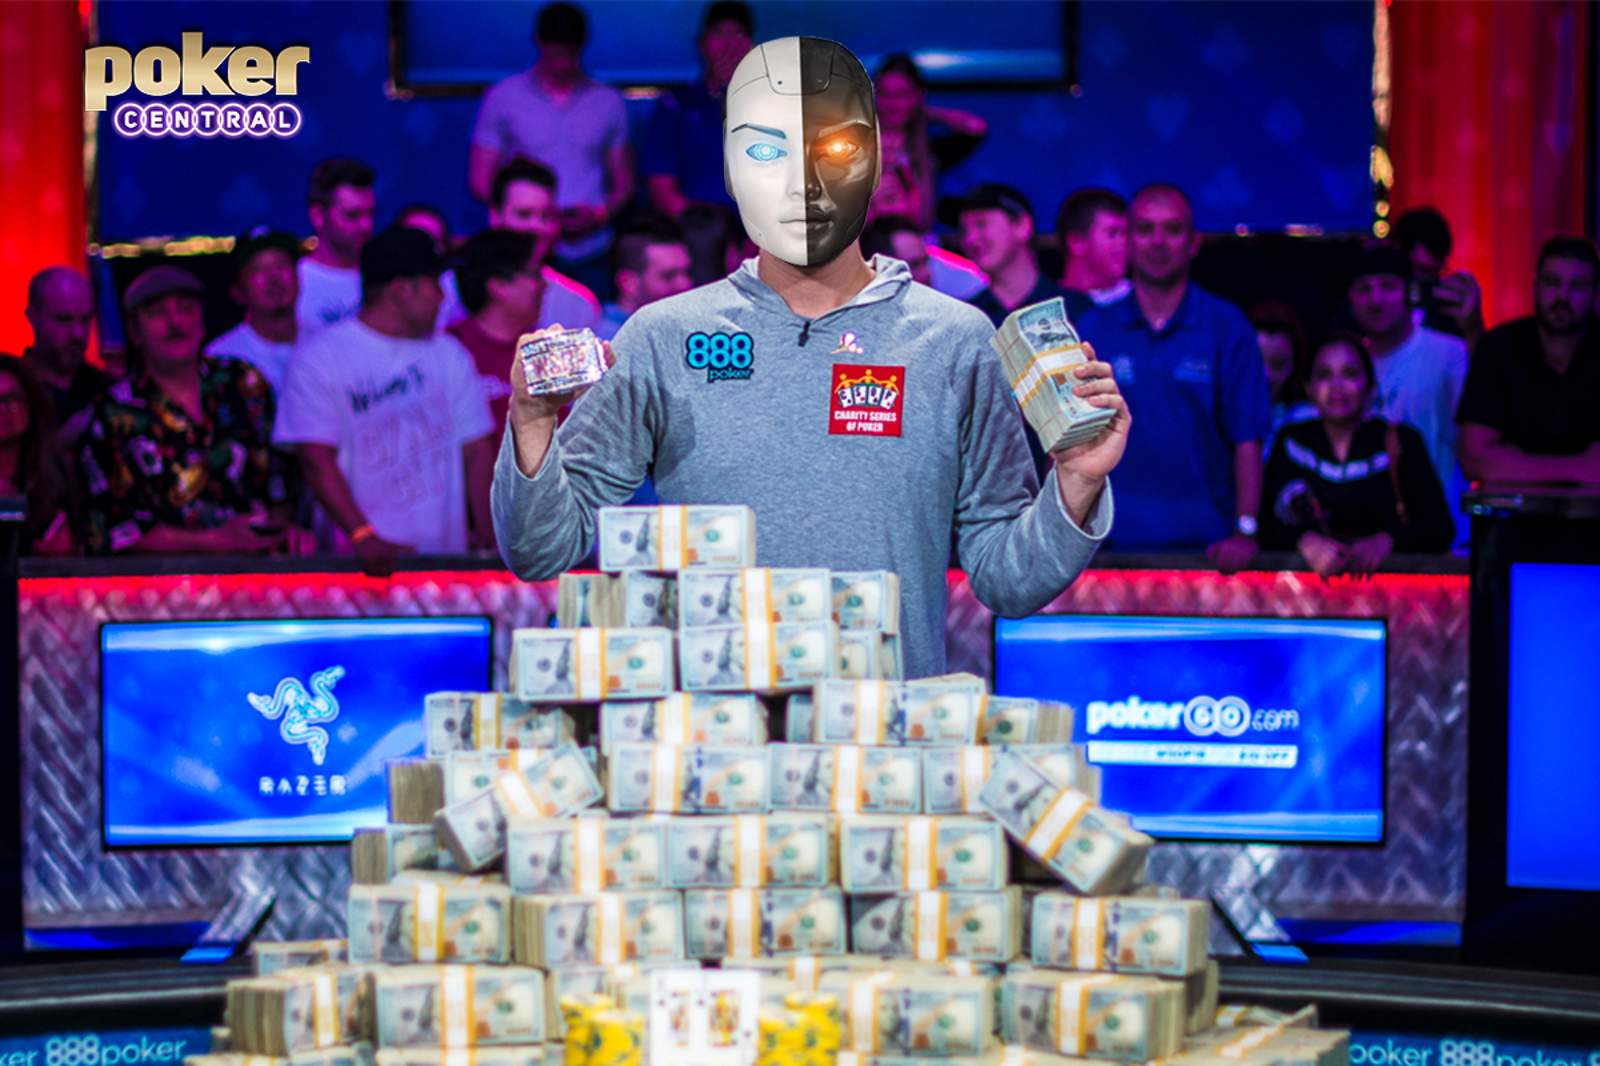 What if…a Robot won the World Series of Poker?